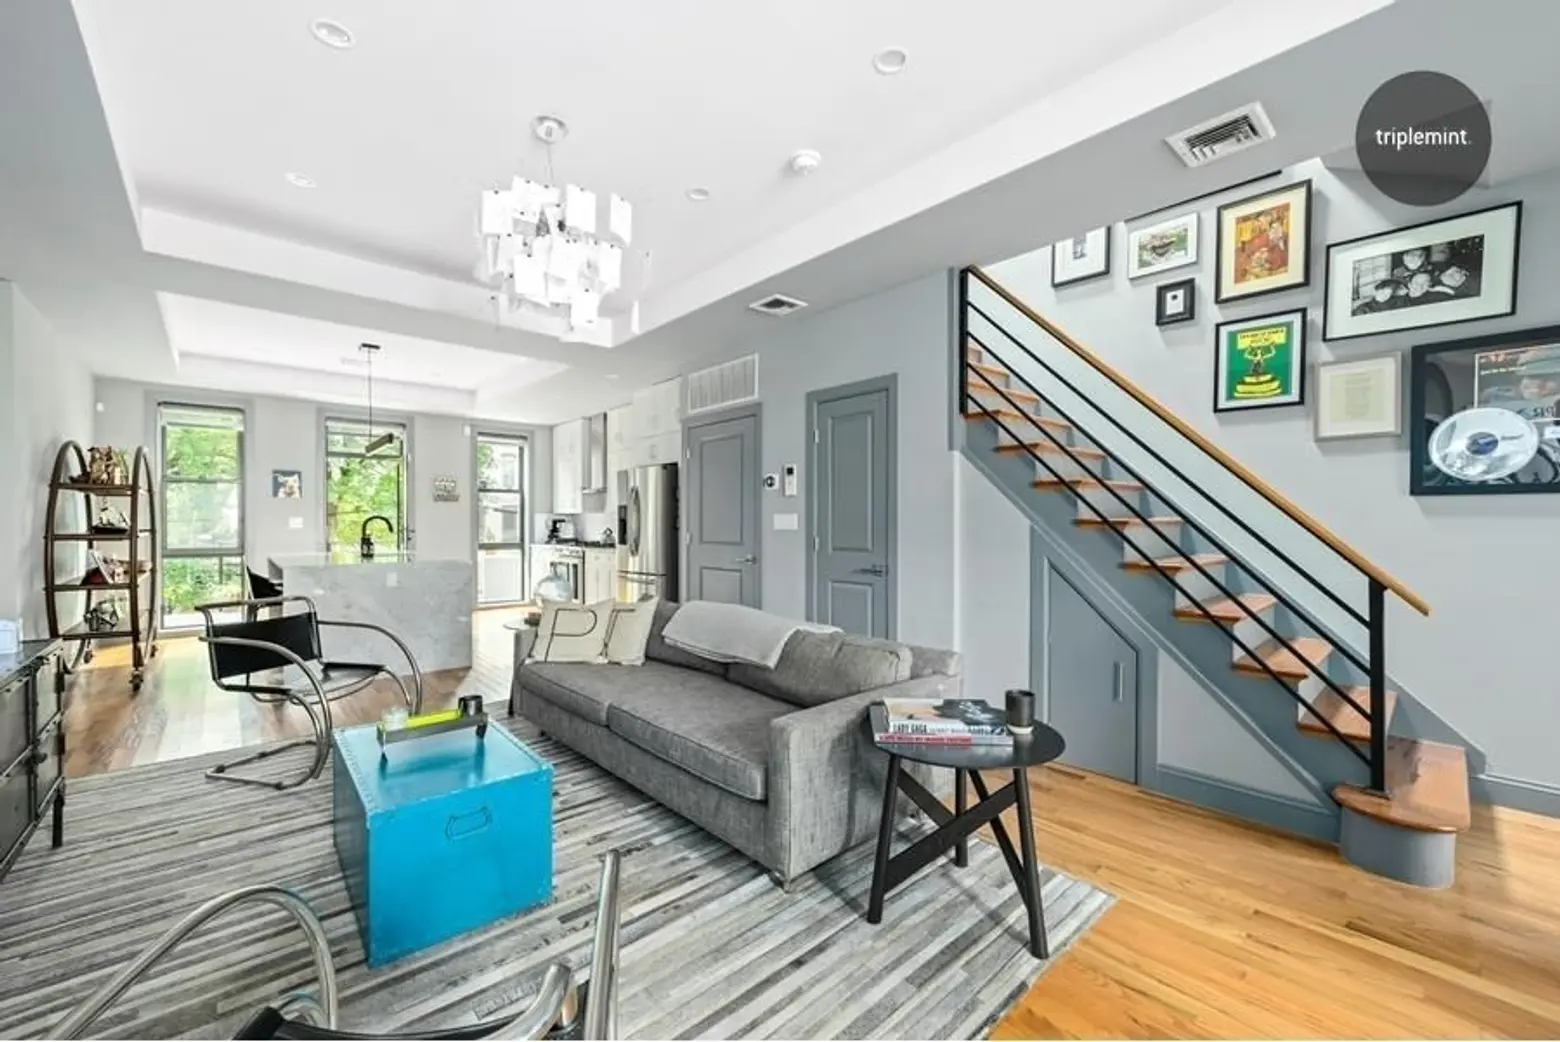 Star of Netflix’s ’13 Reasons Why’ sells cute Ocean Hill townhouse for $1.5M